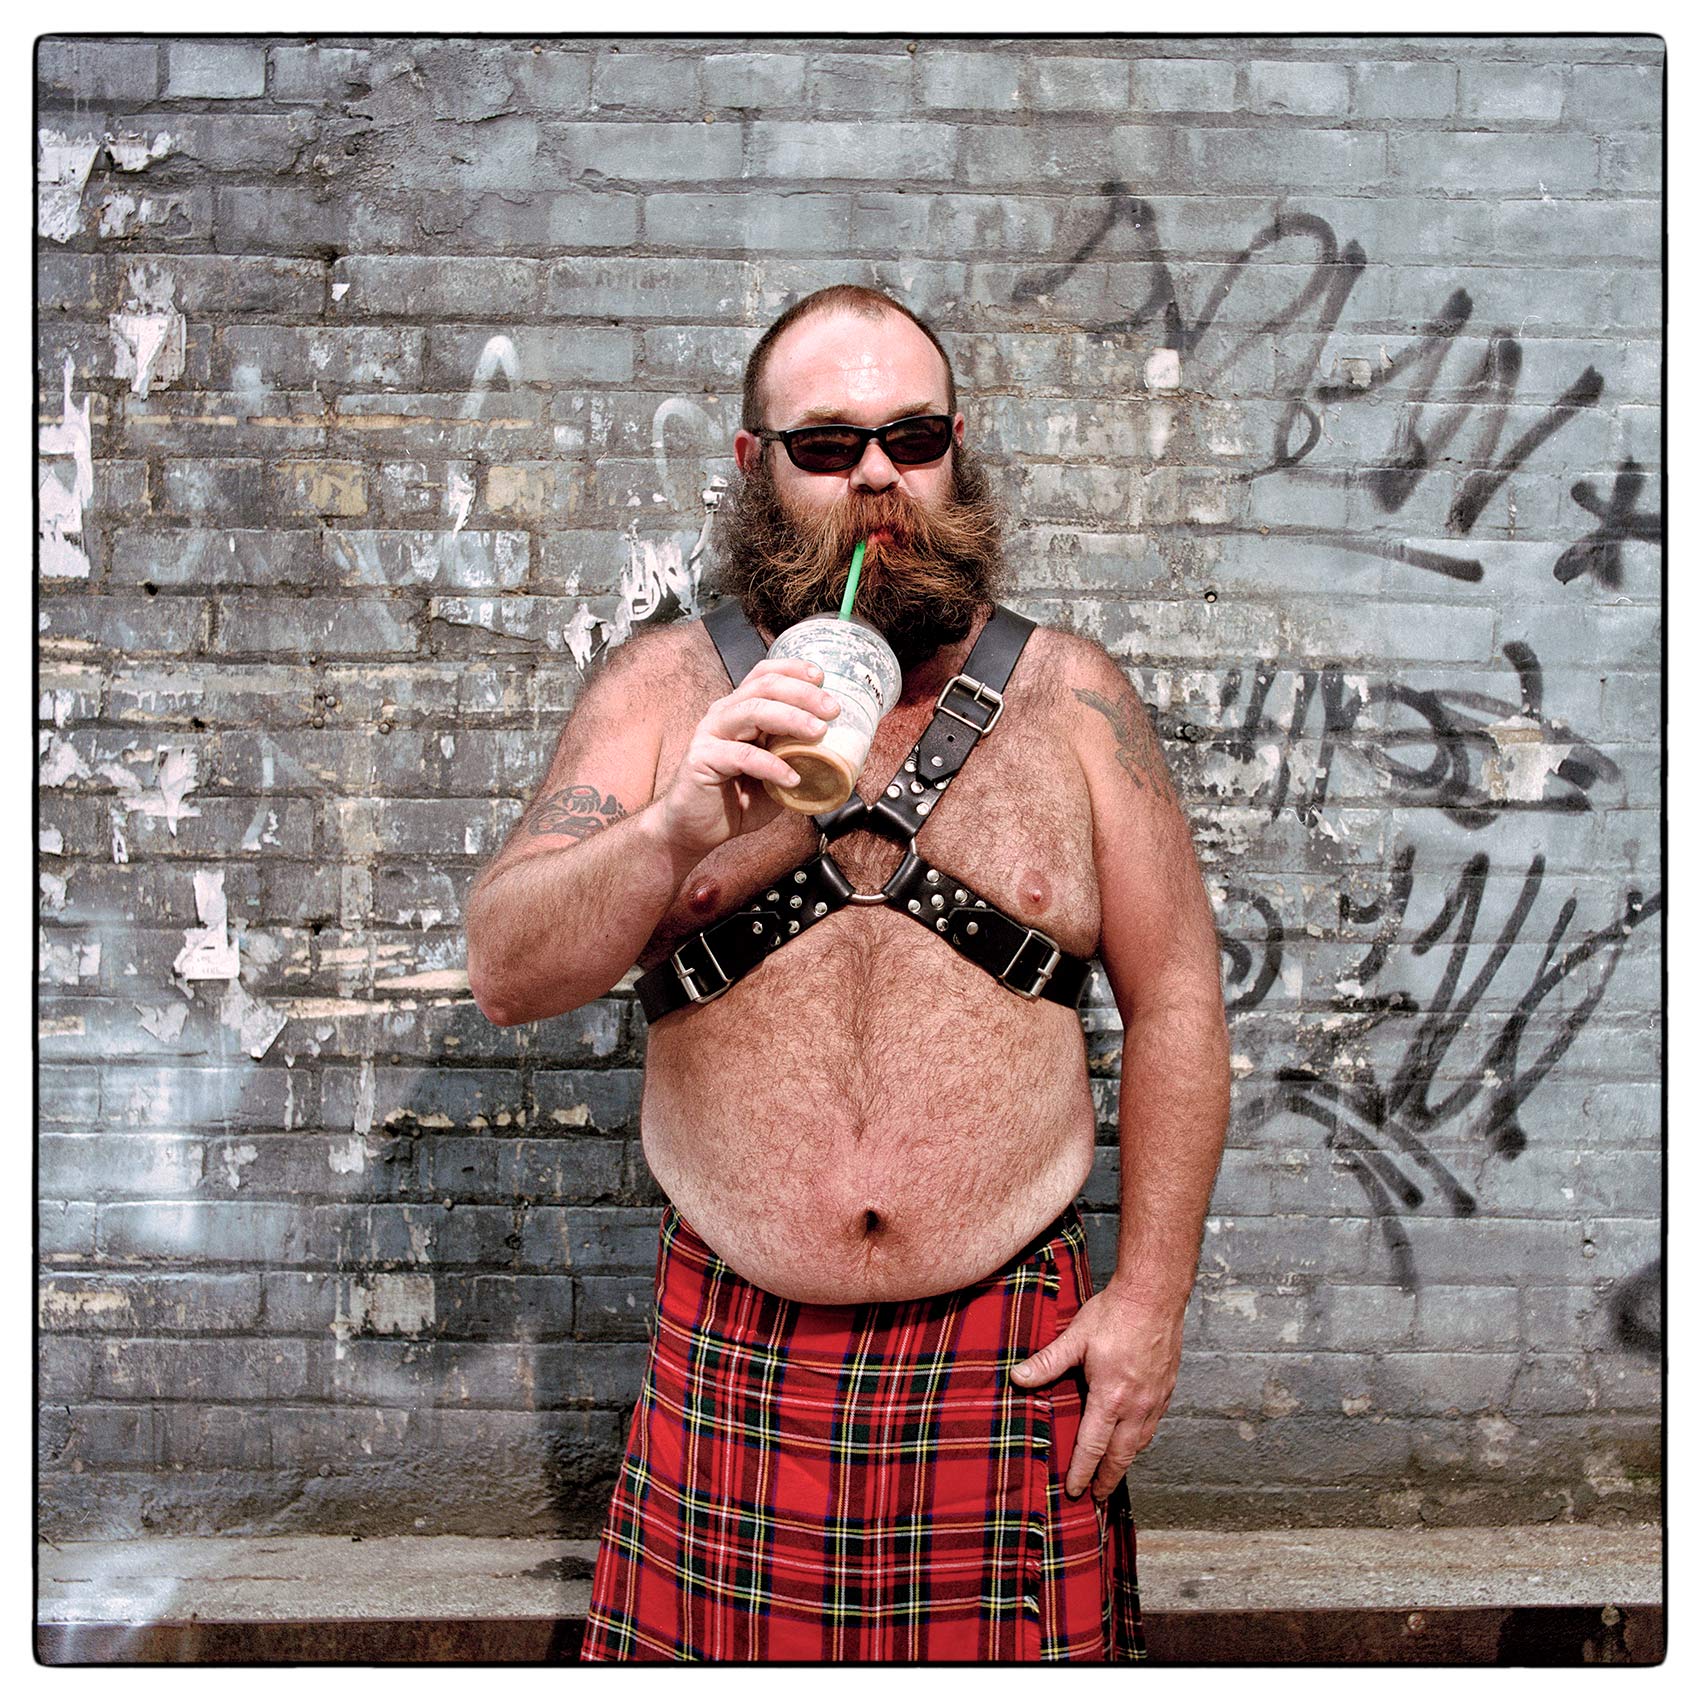 a-man-with-a-beard-dressed-in-a-kilt-poses-for-a-photo-during-toronto-pride